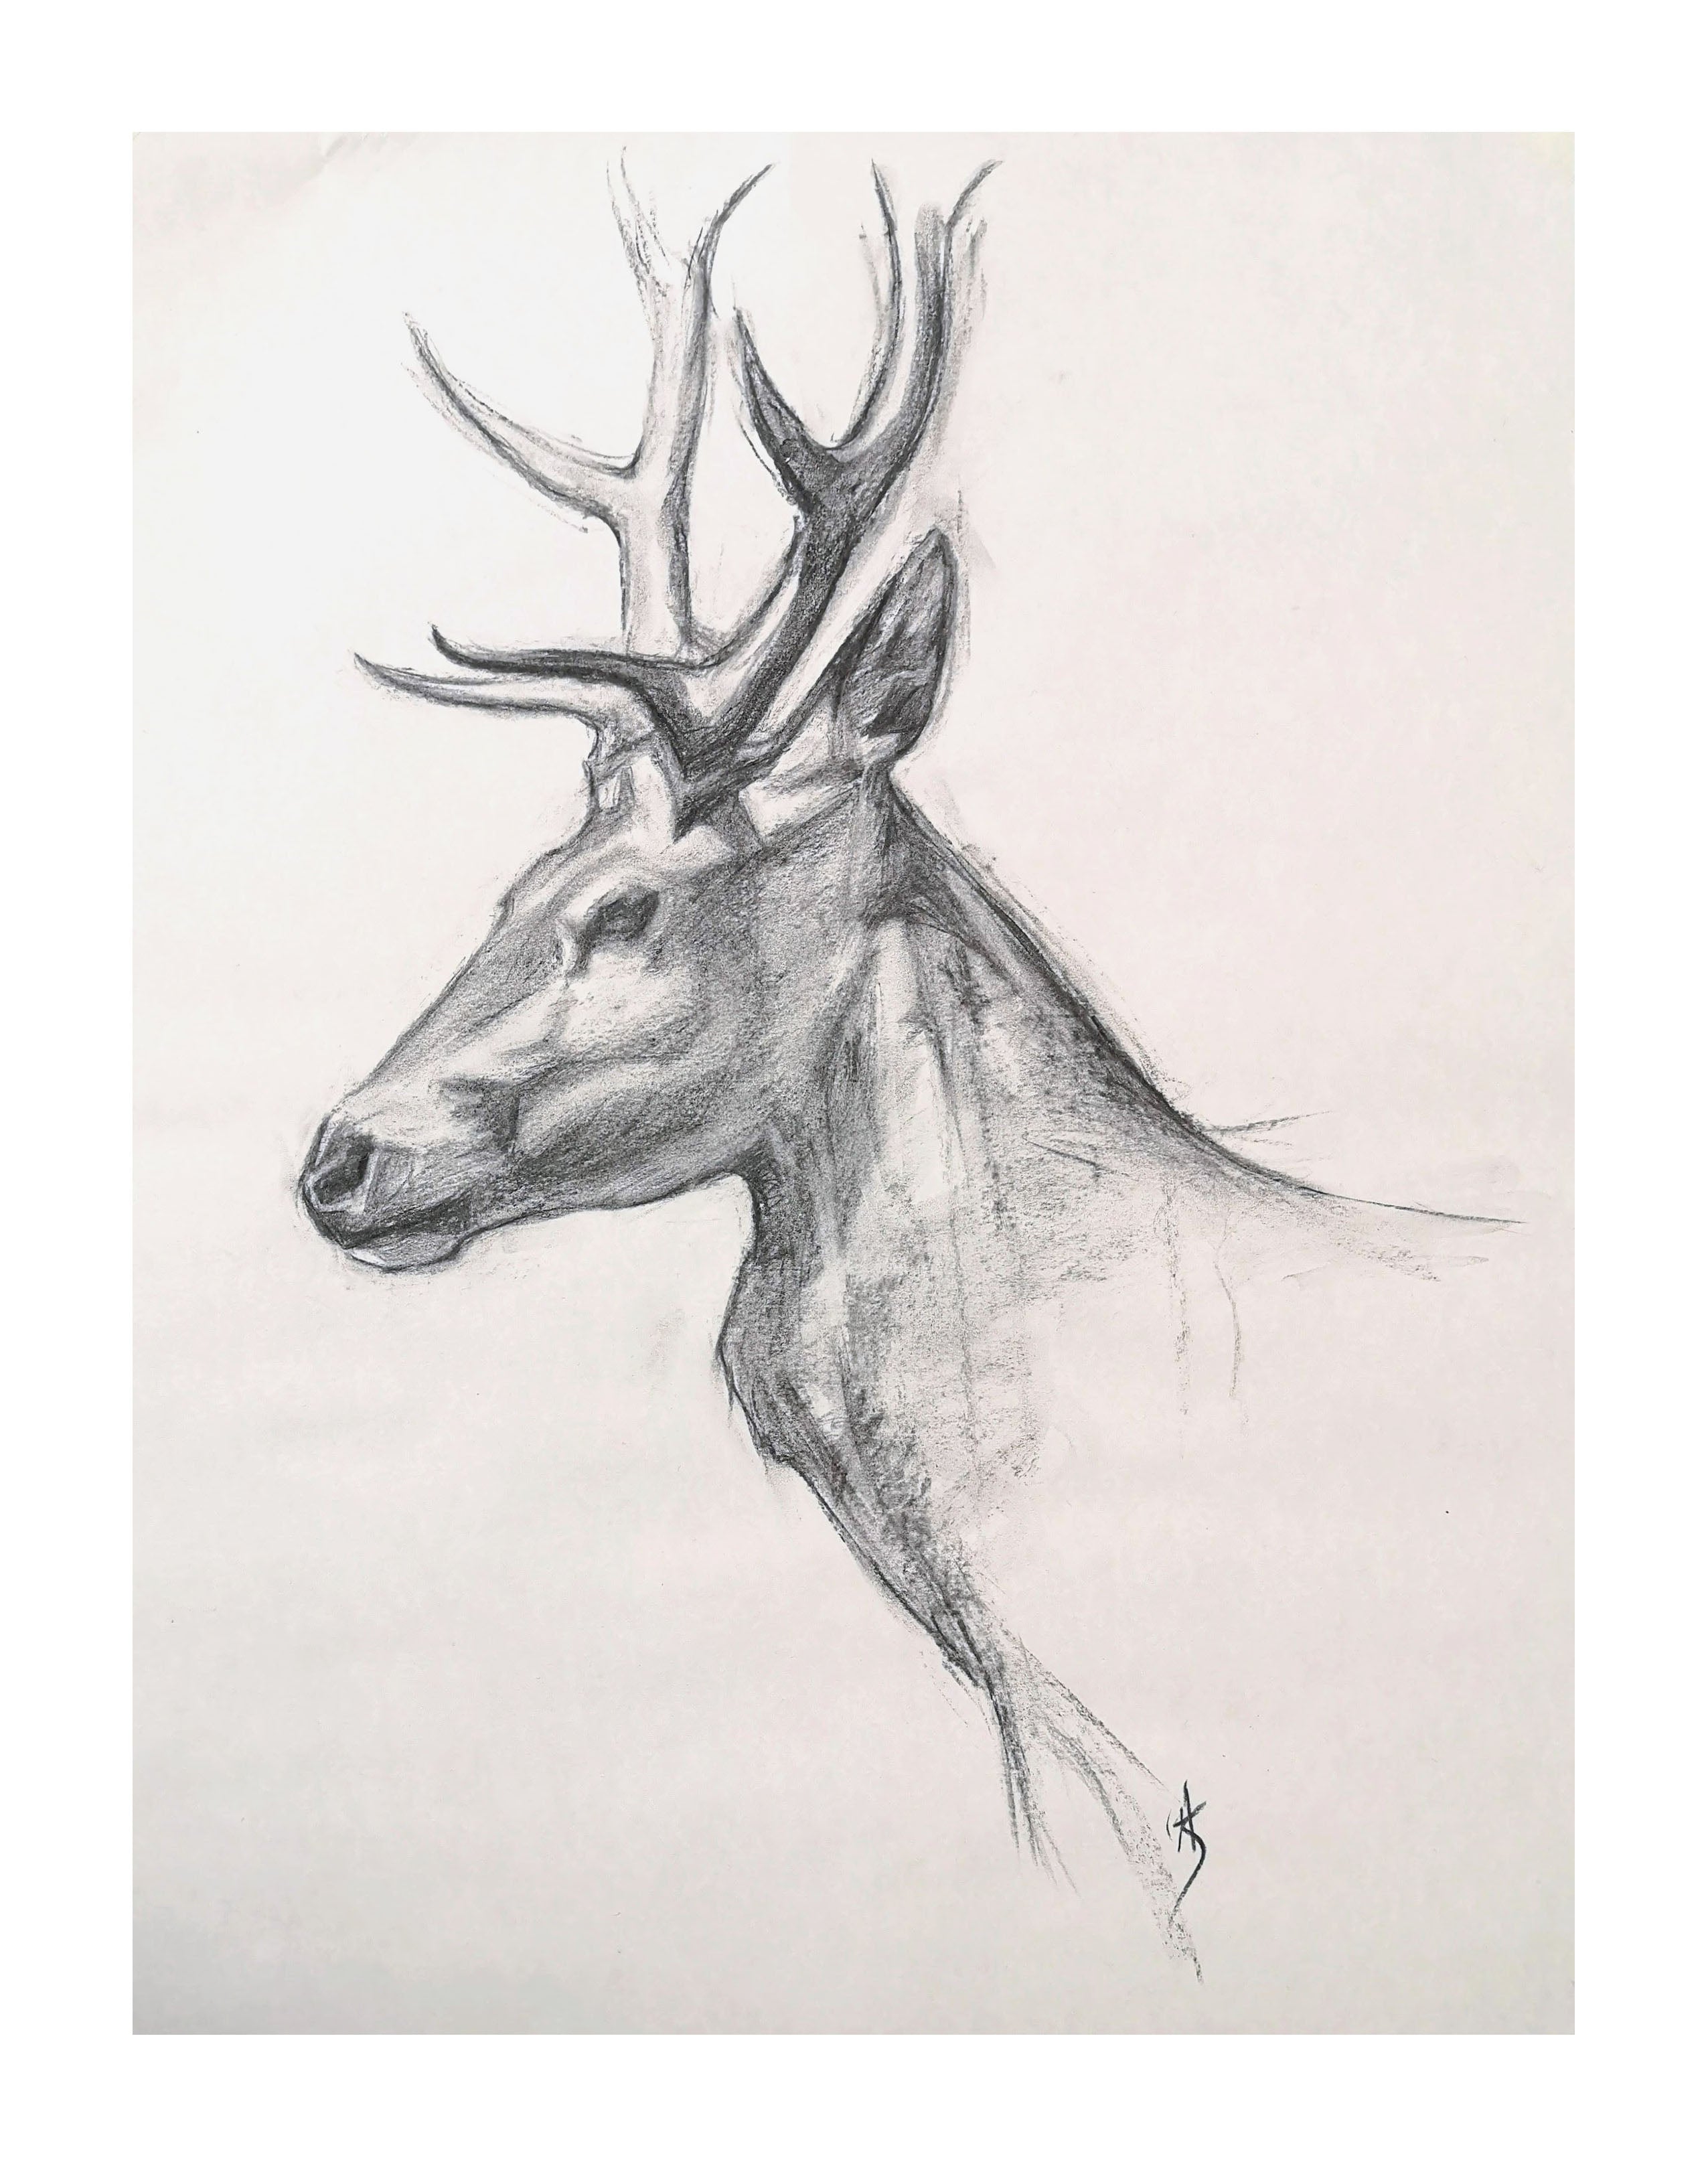 Tips To Help You Learn to Draw Animals | Craftsy | www.craftsy.com